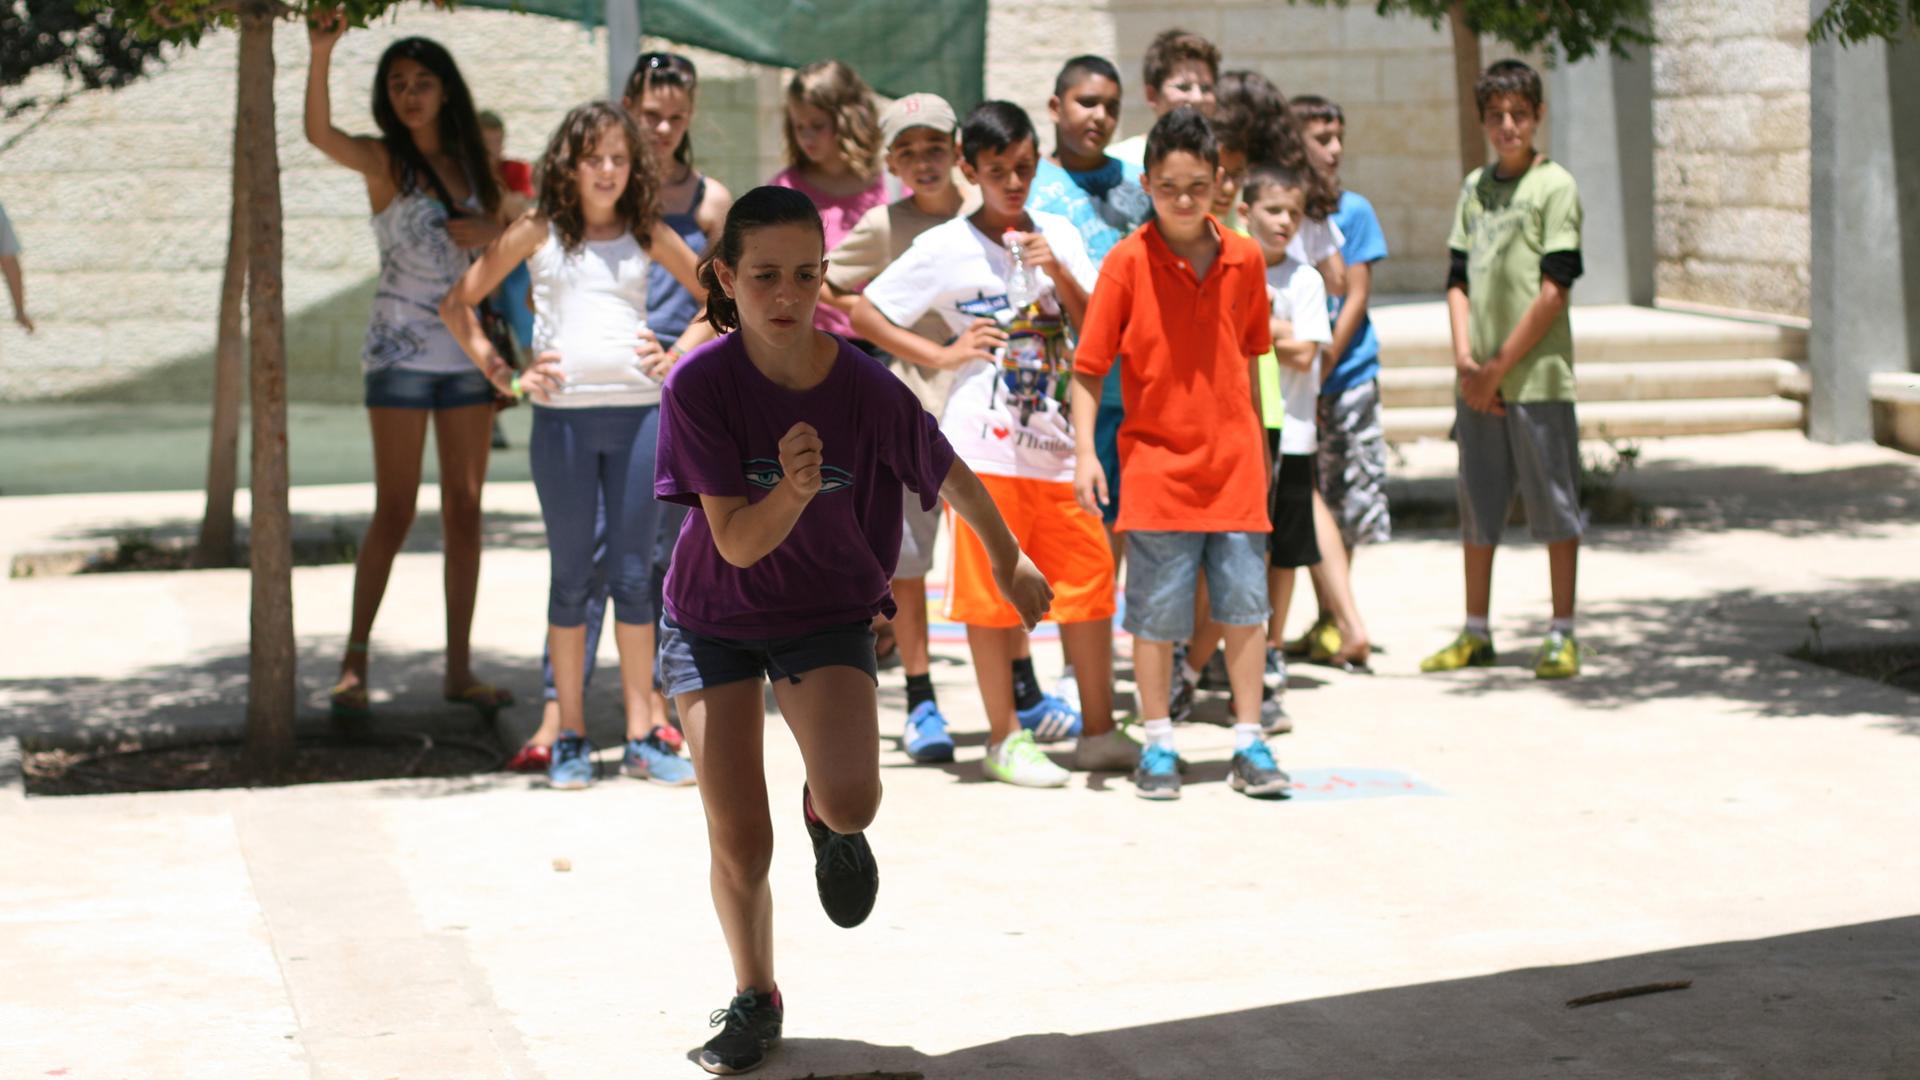 The kids at Project Harmony camp mostly do normal summer activities, like sports tournaments, as a way to get to know each other. Here, children compete in a jumping contest.